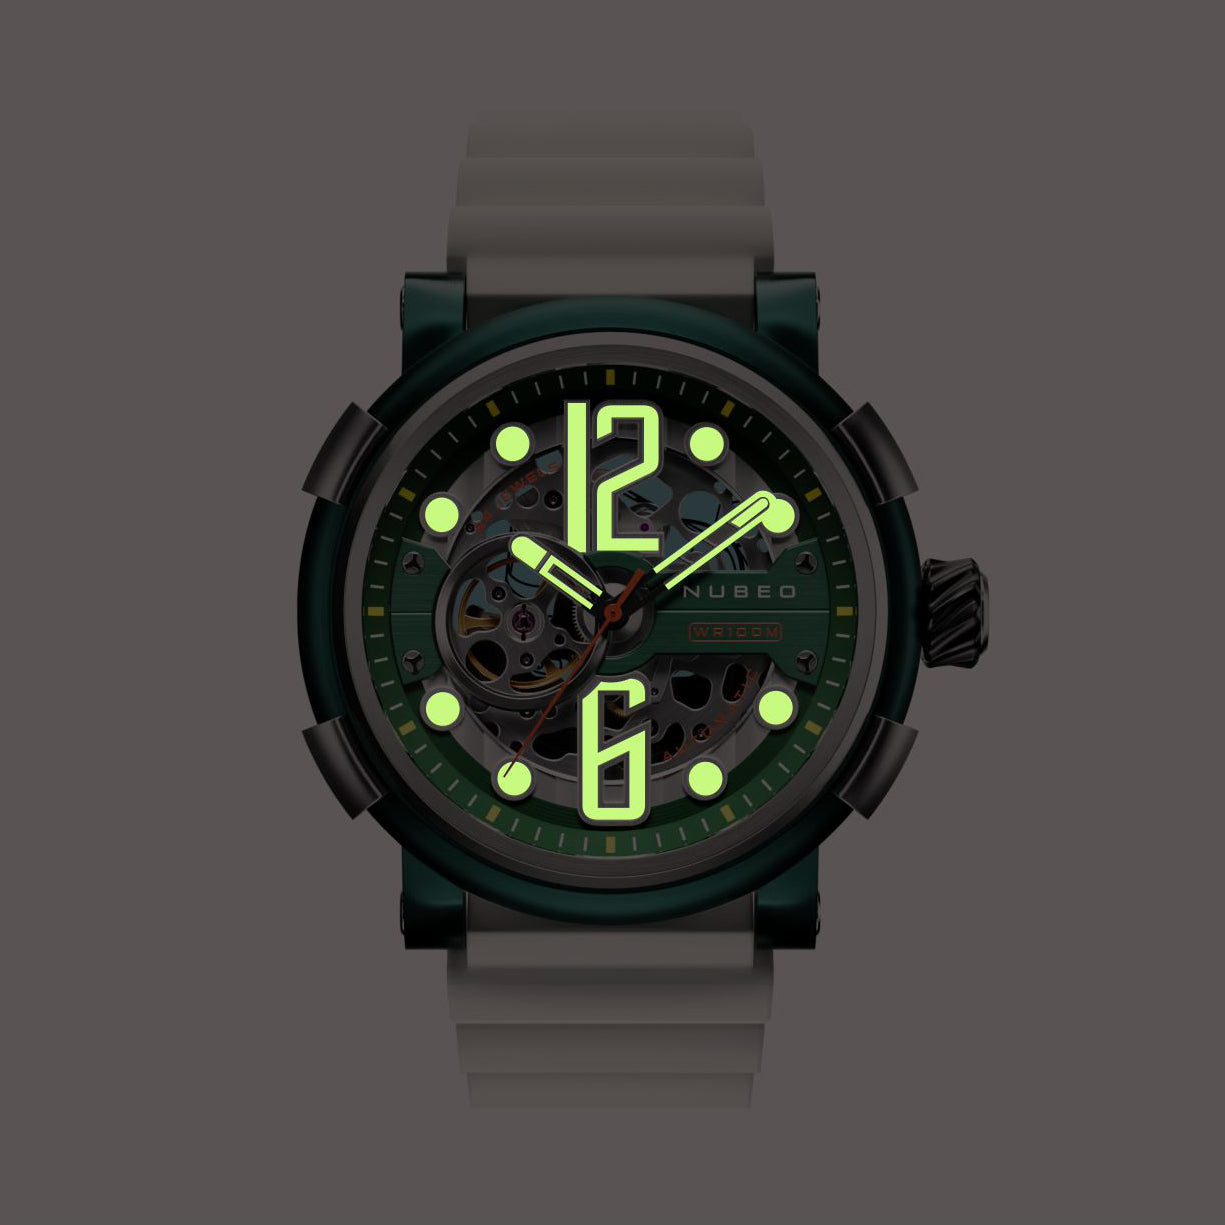 NUBEO Nubeo Space Orion Men's Japanese Automatic Green Watch NB-6062-02